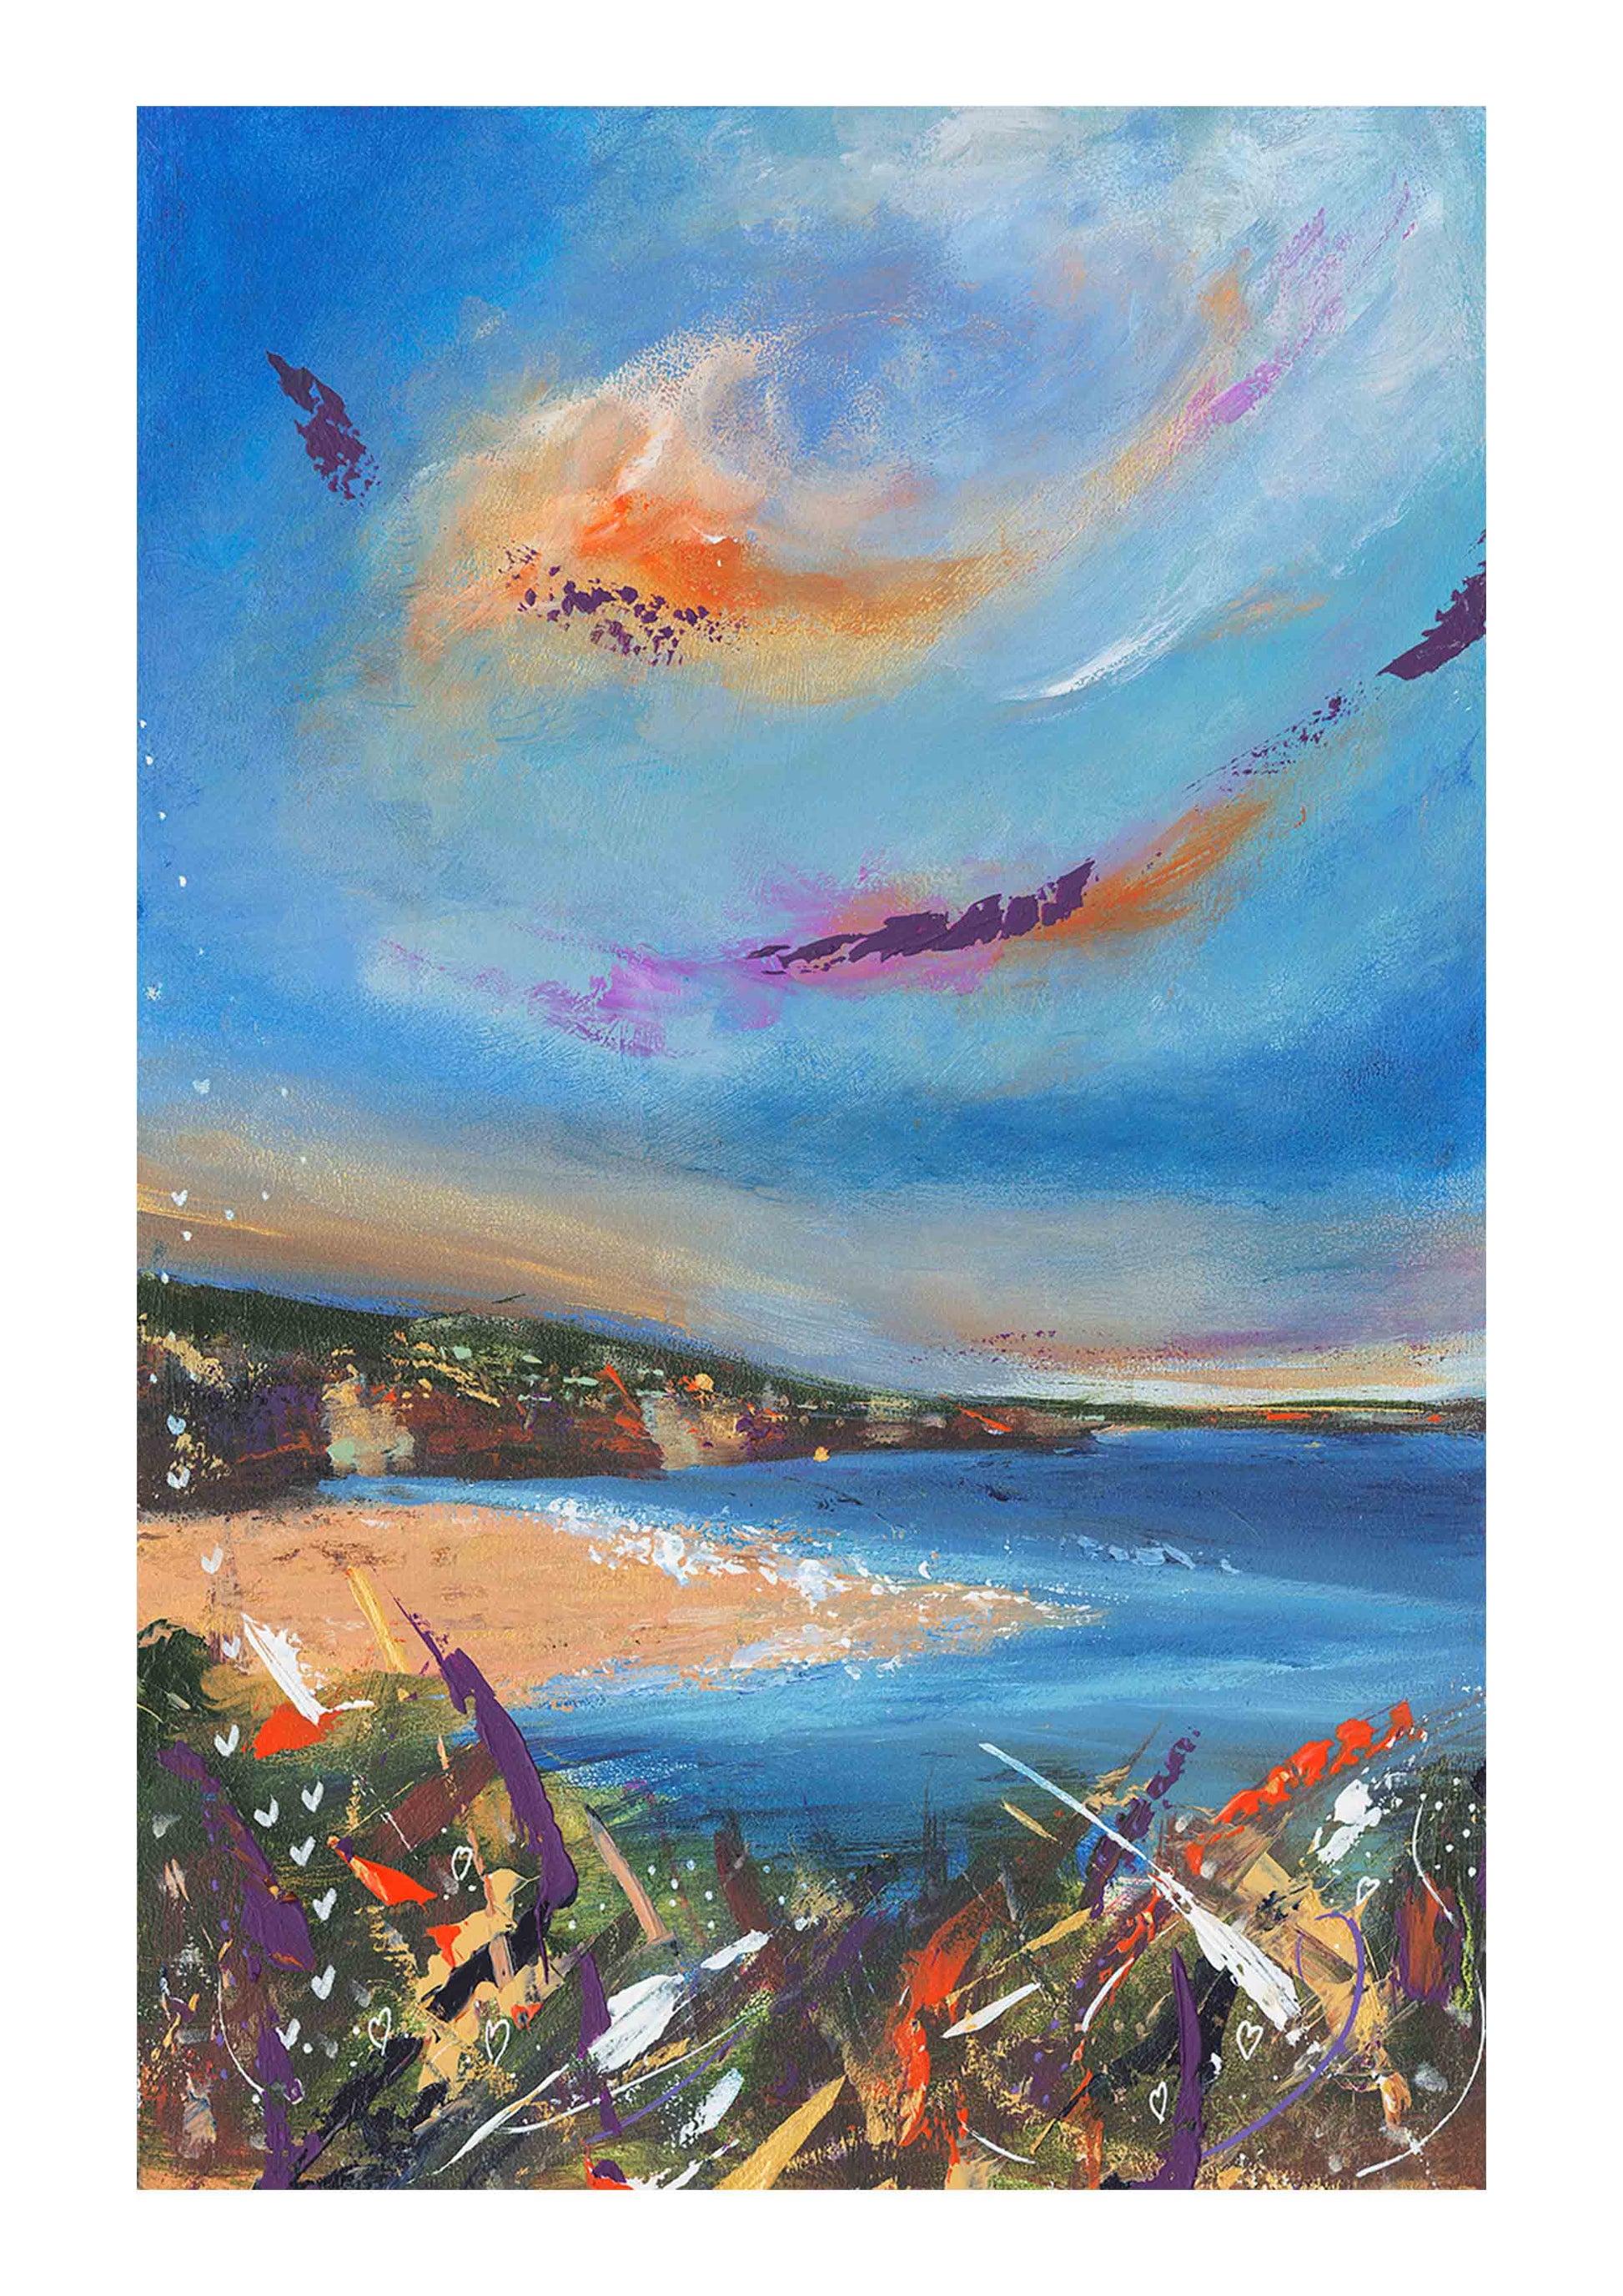 embrace your strength art print of Porthkidney beach in Cornwall by Leana Robinson art